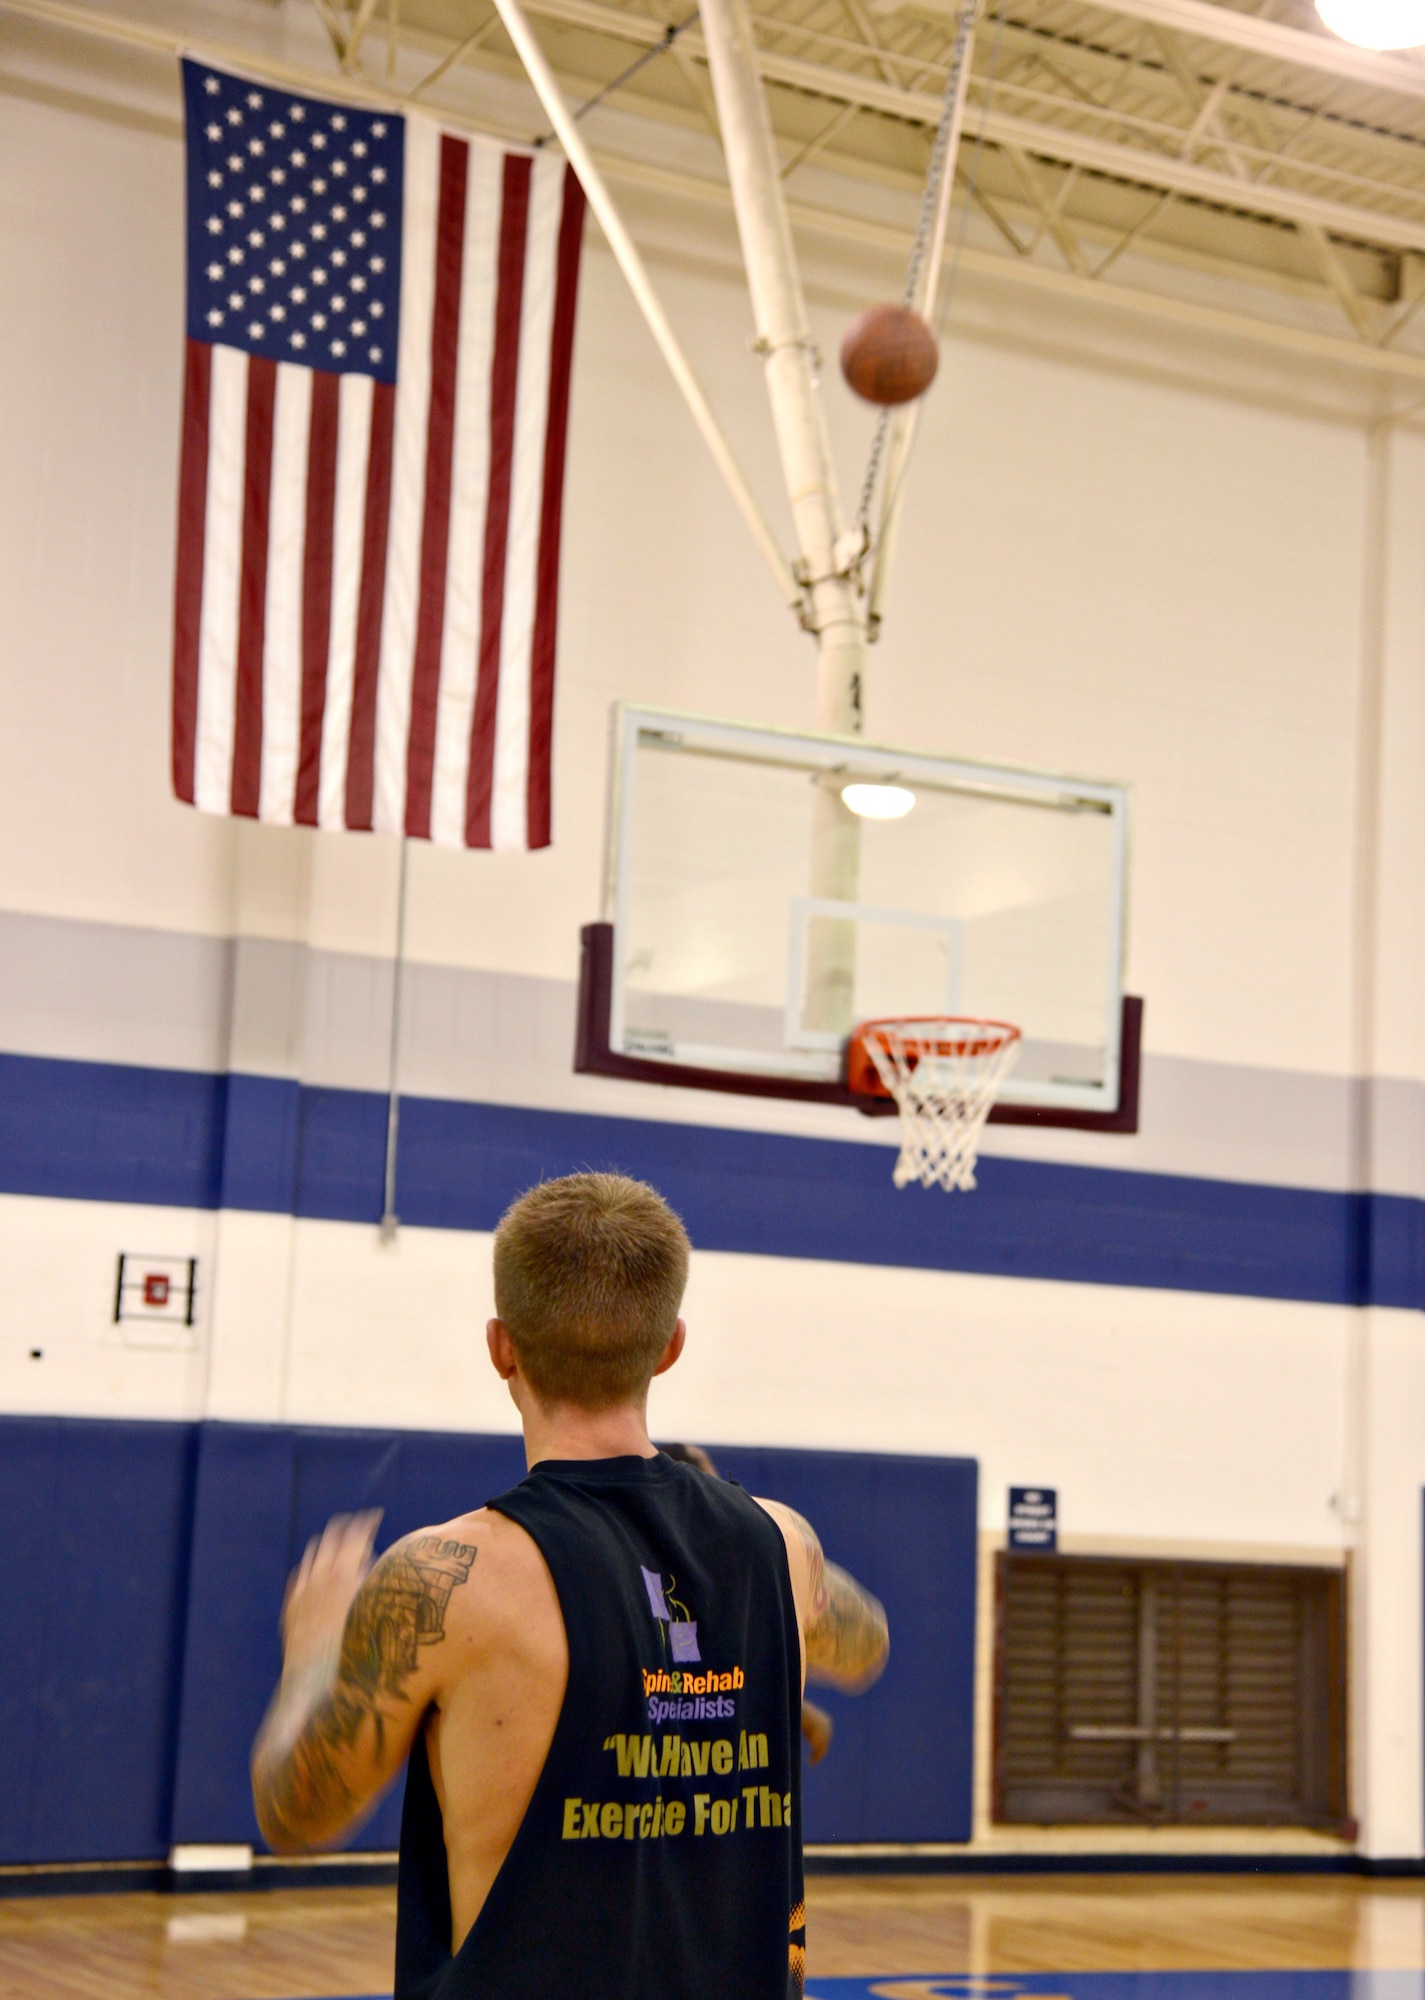 Robin Uptain, U.S. Army retired, aims for a 3-point goal during the 3-point basketball competition as part of the Oct. 21 grand reopening activities at the Gerrity Fitness and Sports Center. (Air Force photo by Kelly White/Released)